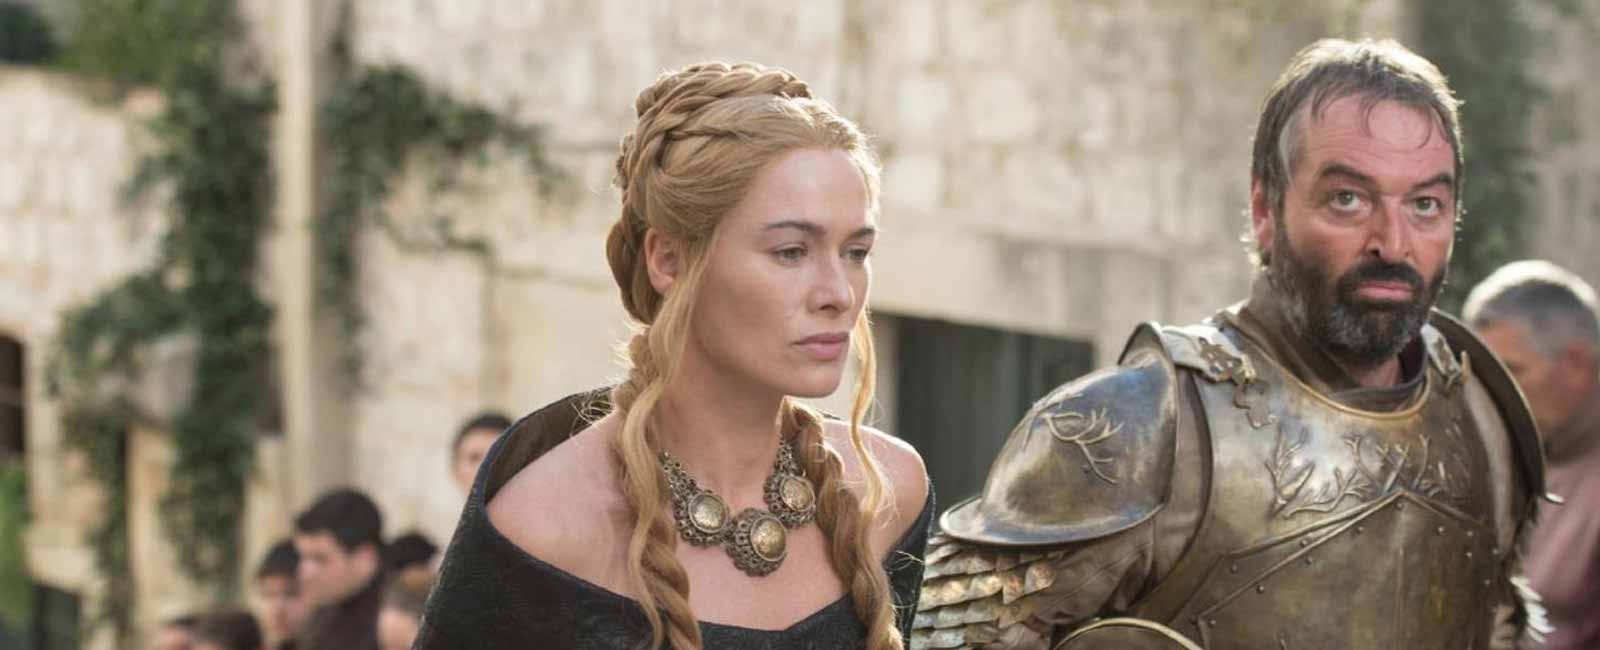 Game of Thrones 5x01 - The Wars to Come